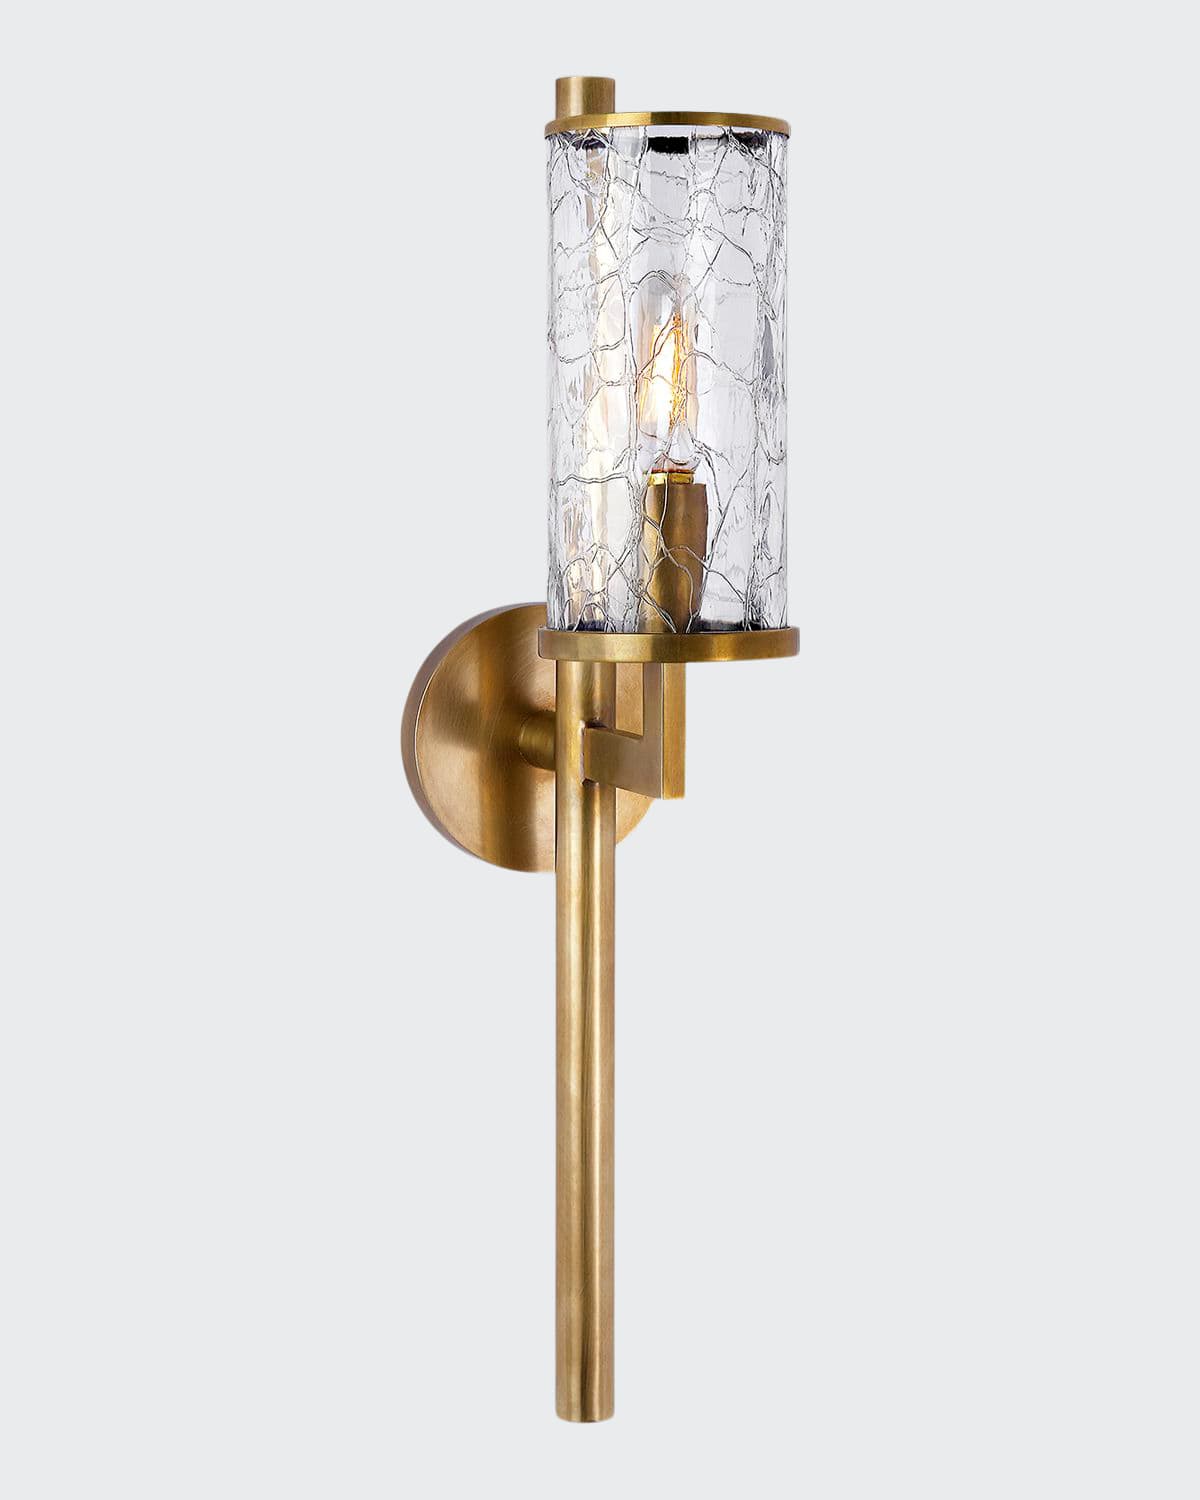 Kelly Wearstler For Visual Comfort Signature Liaison Single Sconce In Antique Brass